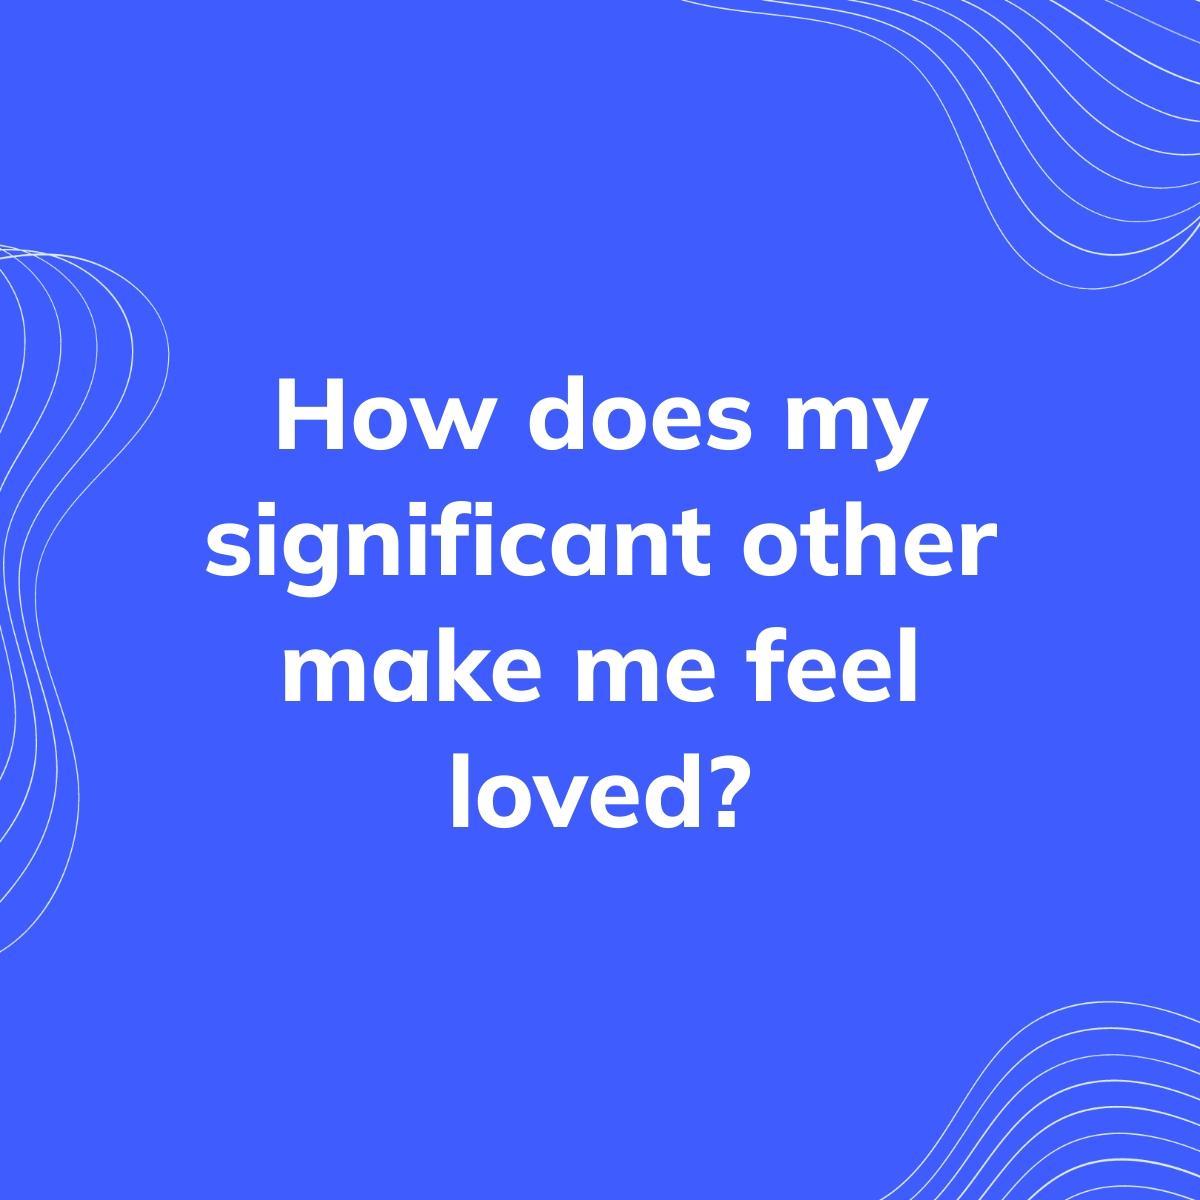 Journal Prompt: How does my significant other make me feel loved?